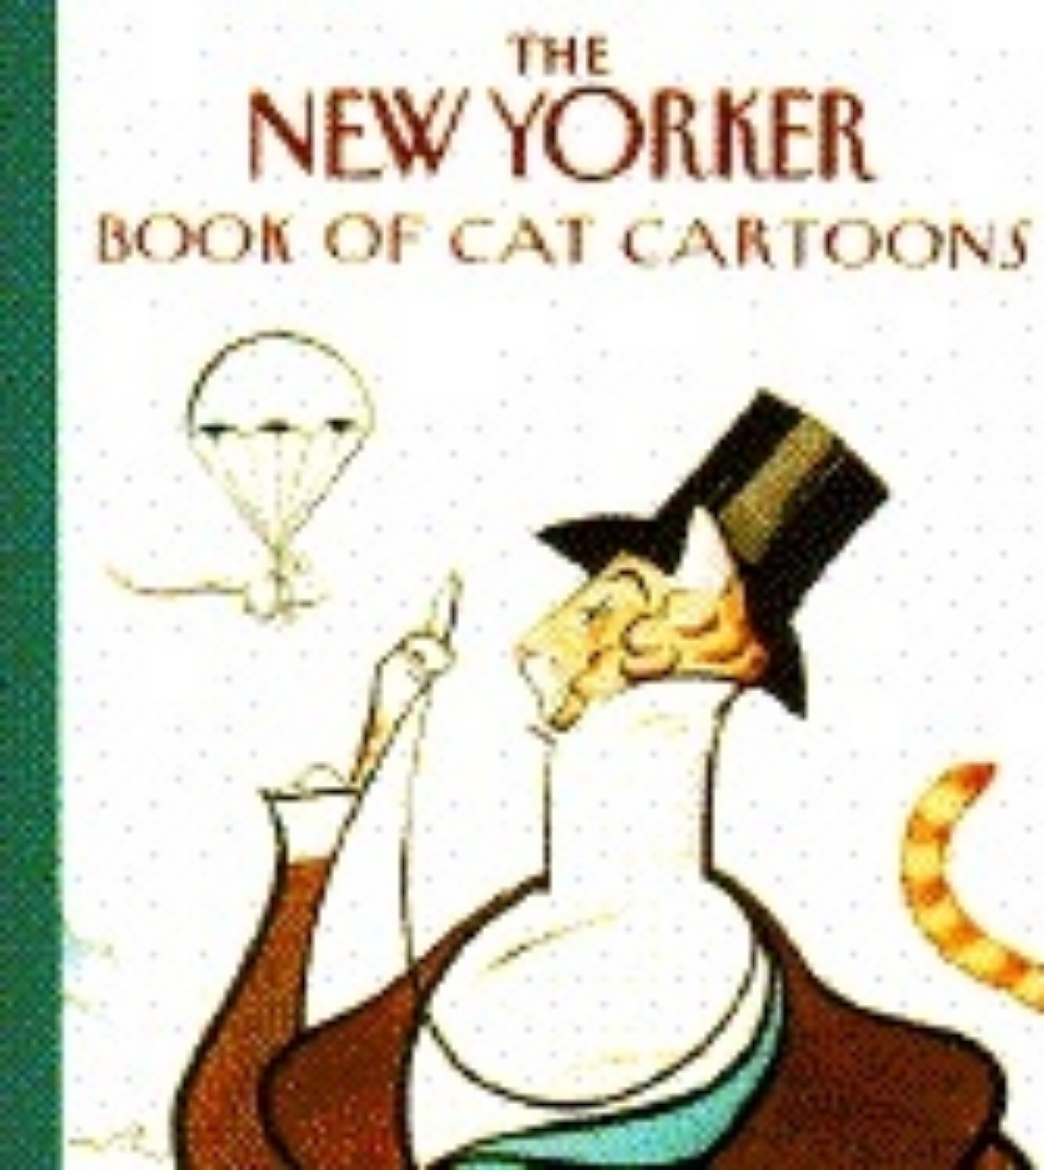 Picture of The New Yorker Book of Cat Cartoons